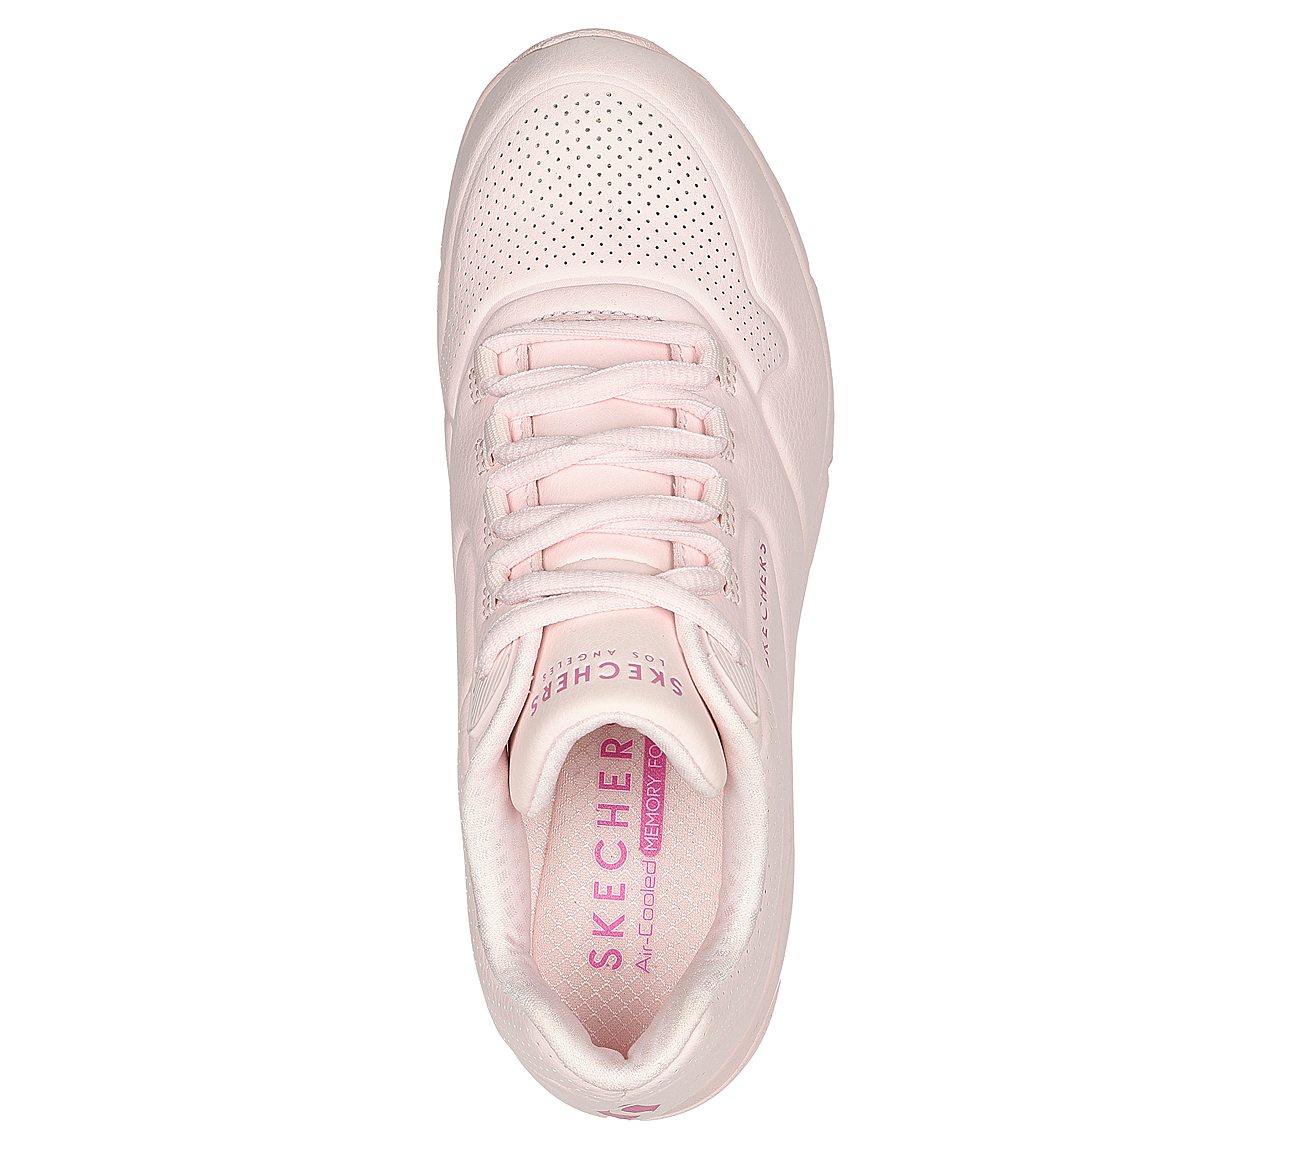 UNO 2 - PASTEL PLAYERS, LLLIGHT PINK Footwear Top View